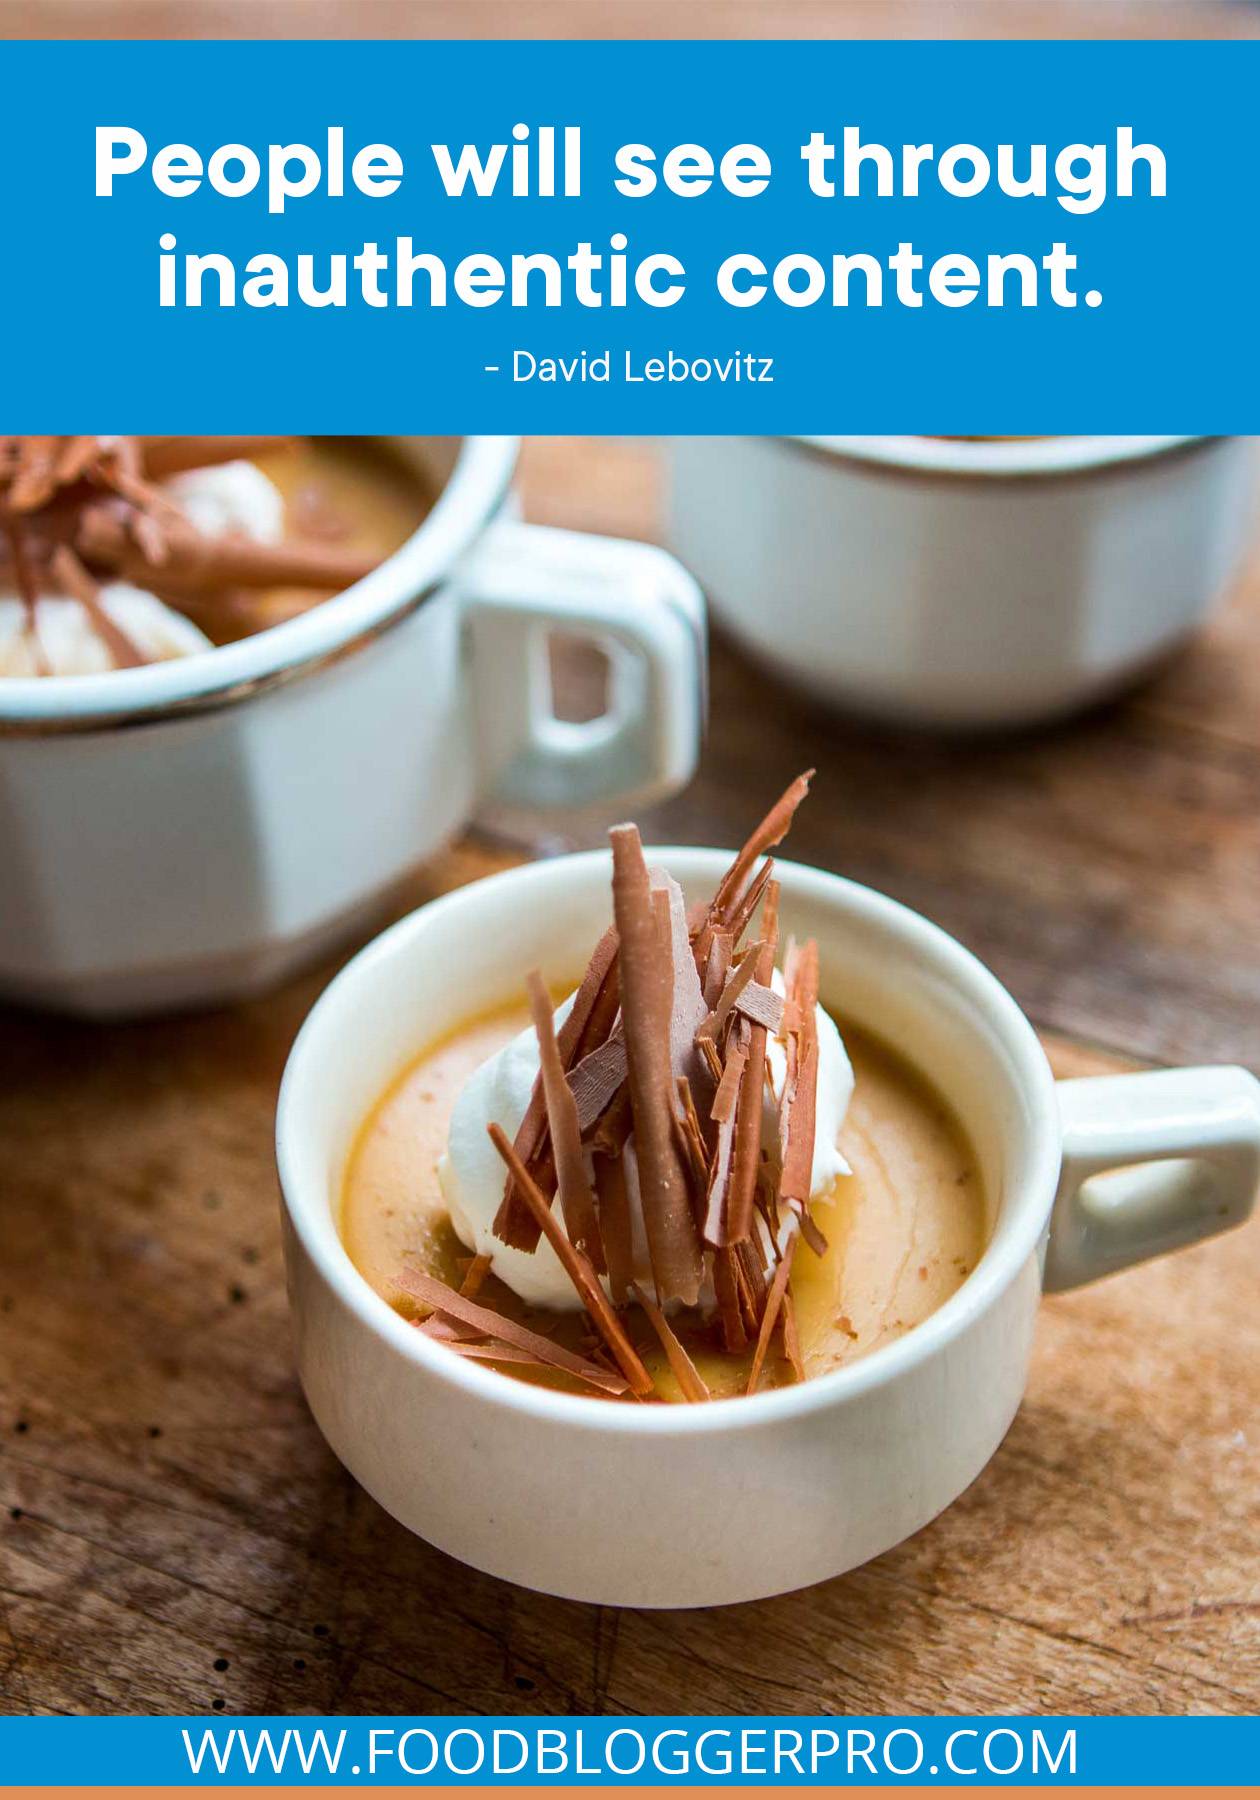 A photograph of coffee caramel panna cotta with a quote from David Lebovitz's episode of The Food Blogger Pro Podcast: "People will see through inauthentic content."